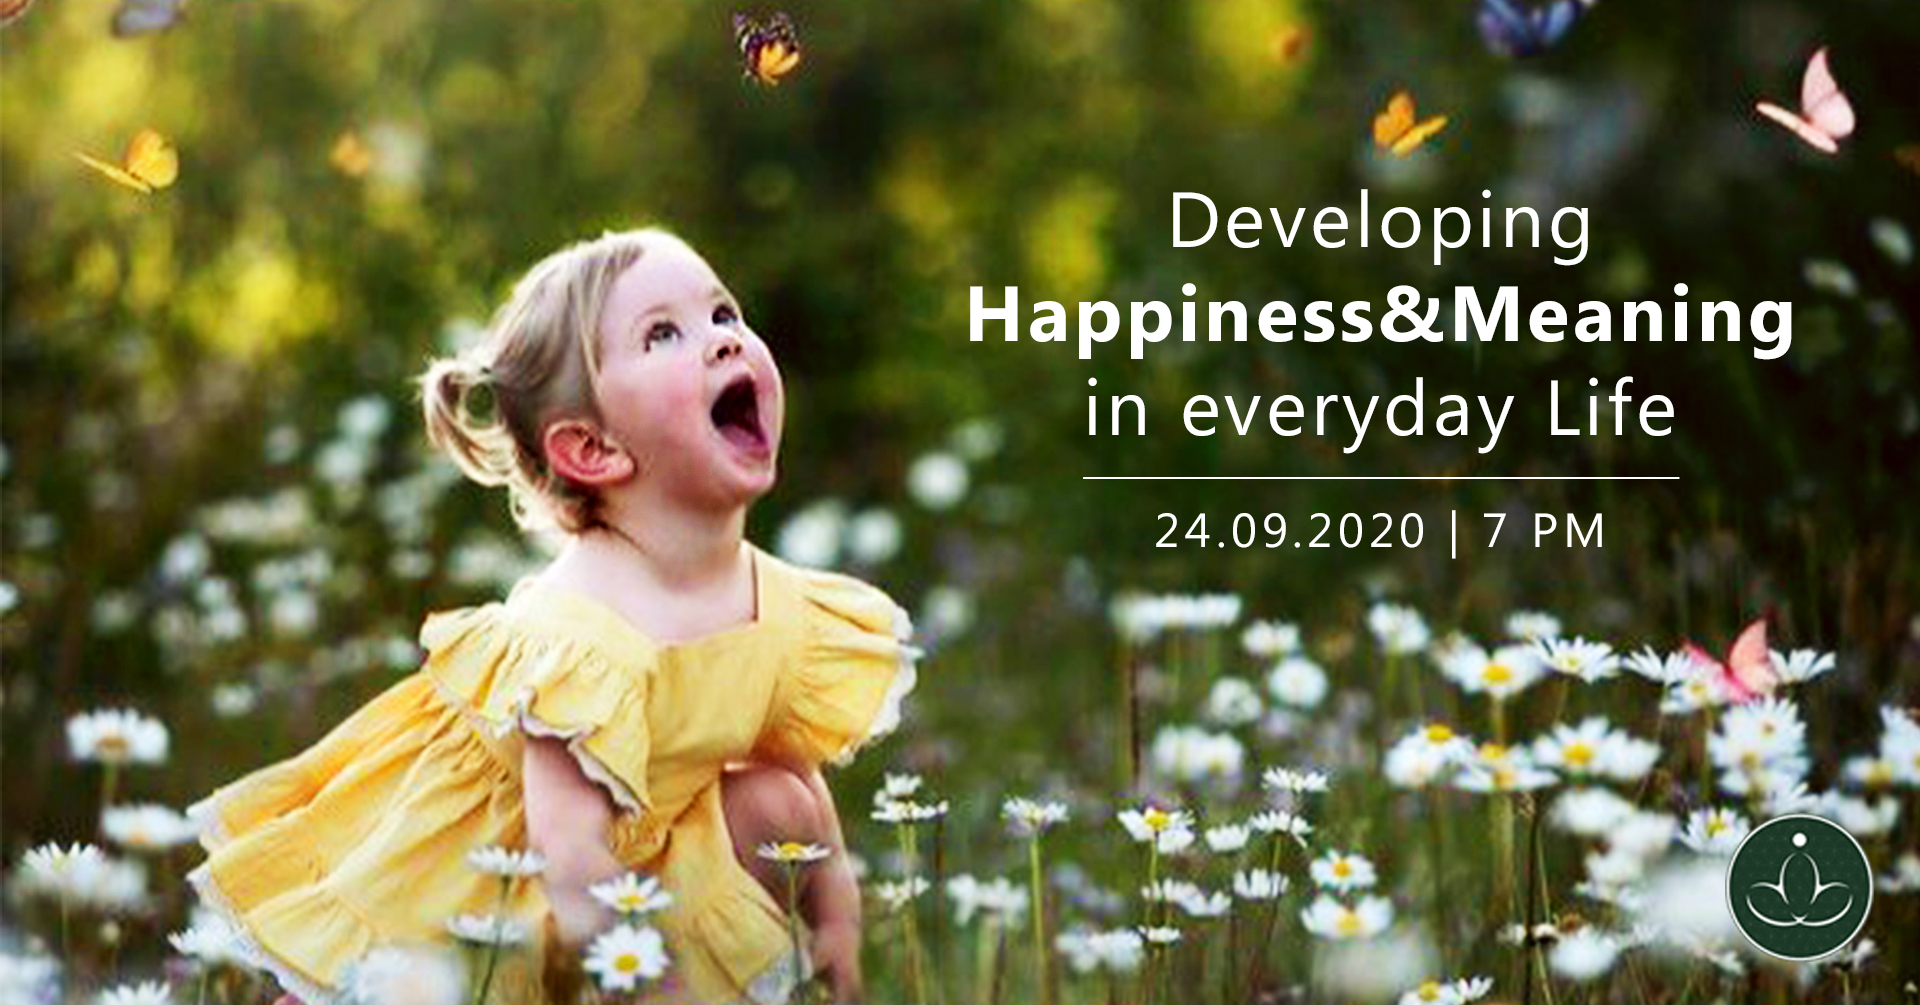 Developing Happiness & Meaning in everyday Life